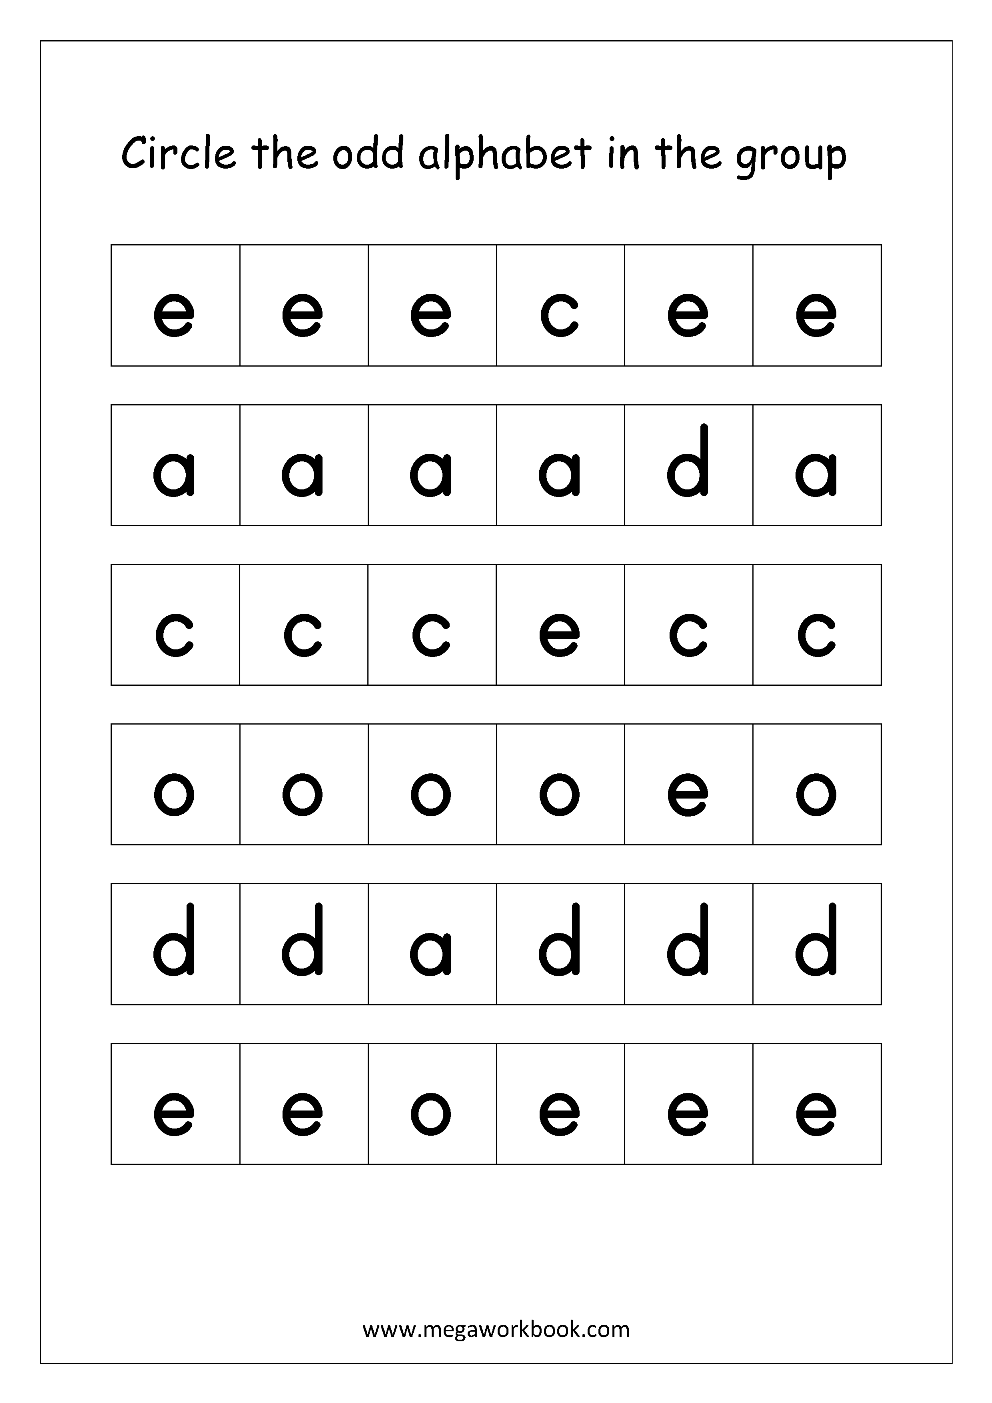 Free English Worksheets - Confusing Alphabets - MegaWorkbook For B And D Confusion Worksheet